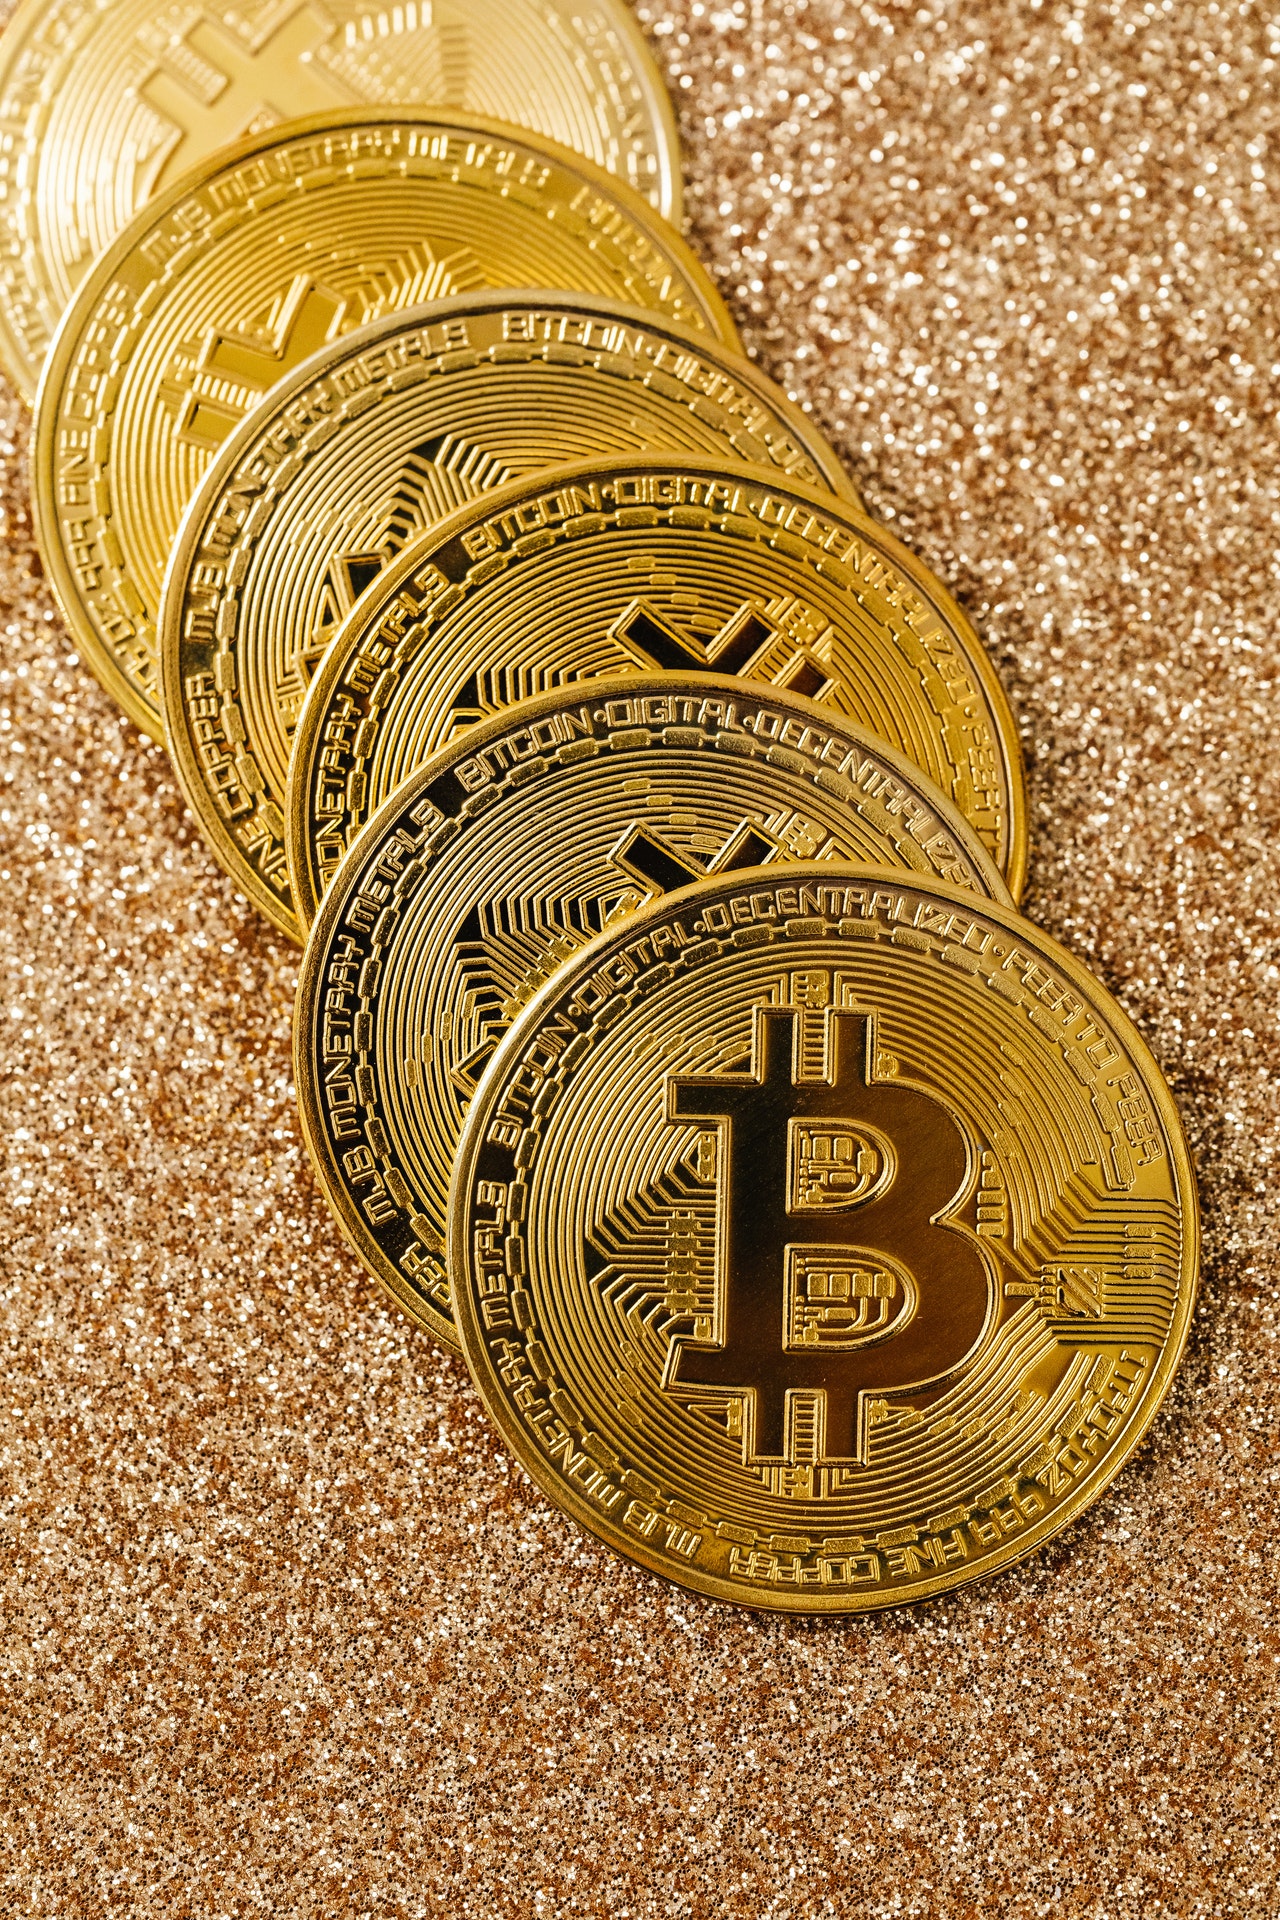 Bitcoin Decentralized Cryptocurrency Article Image